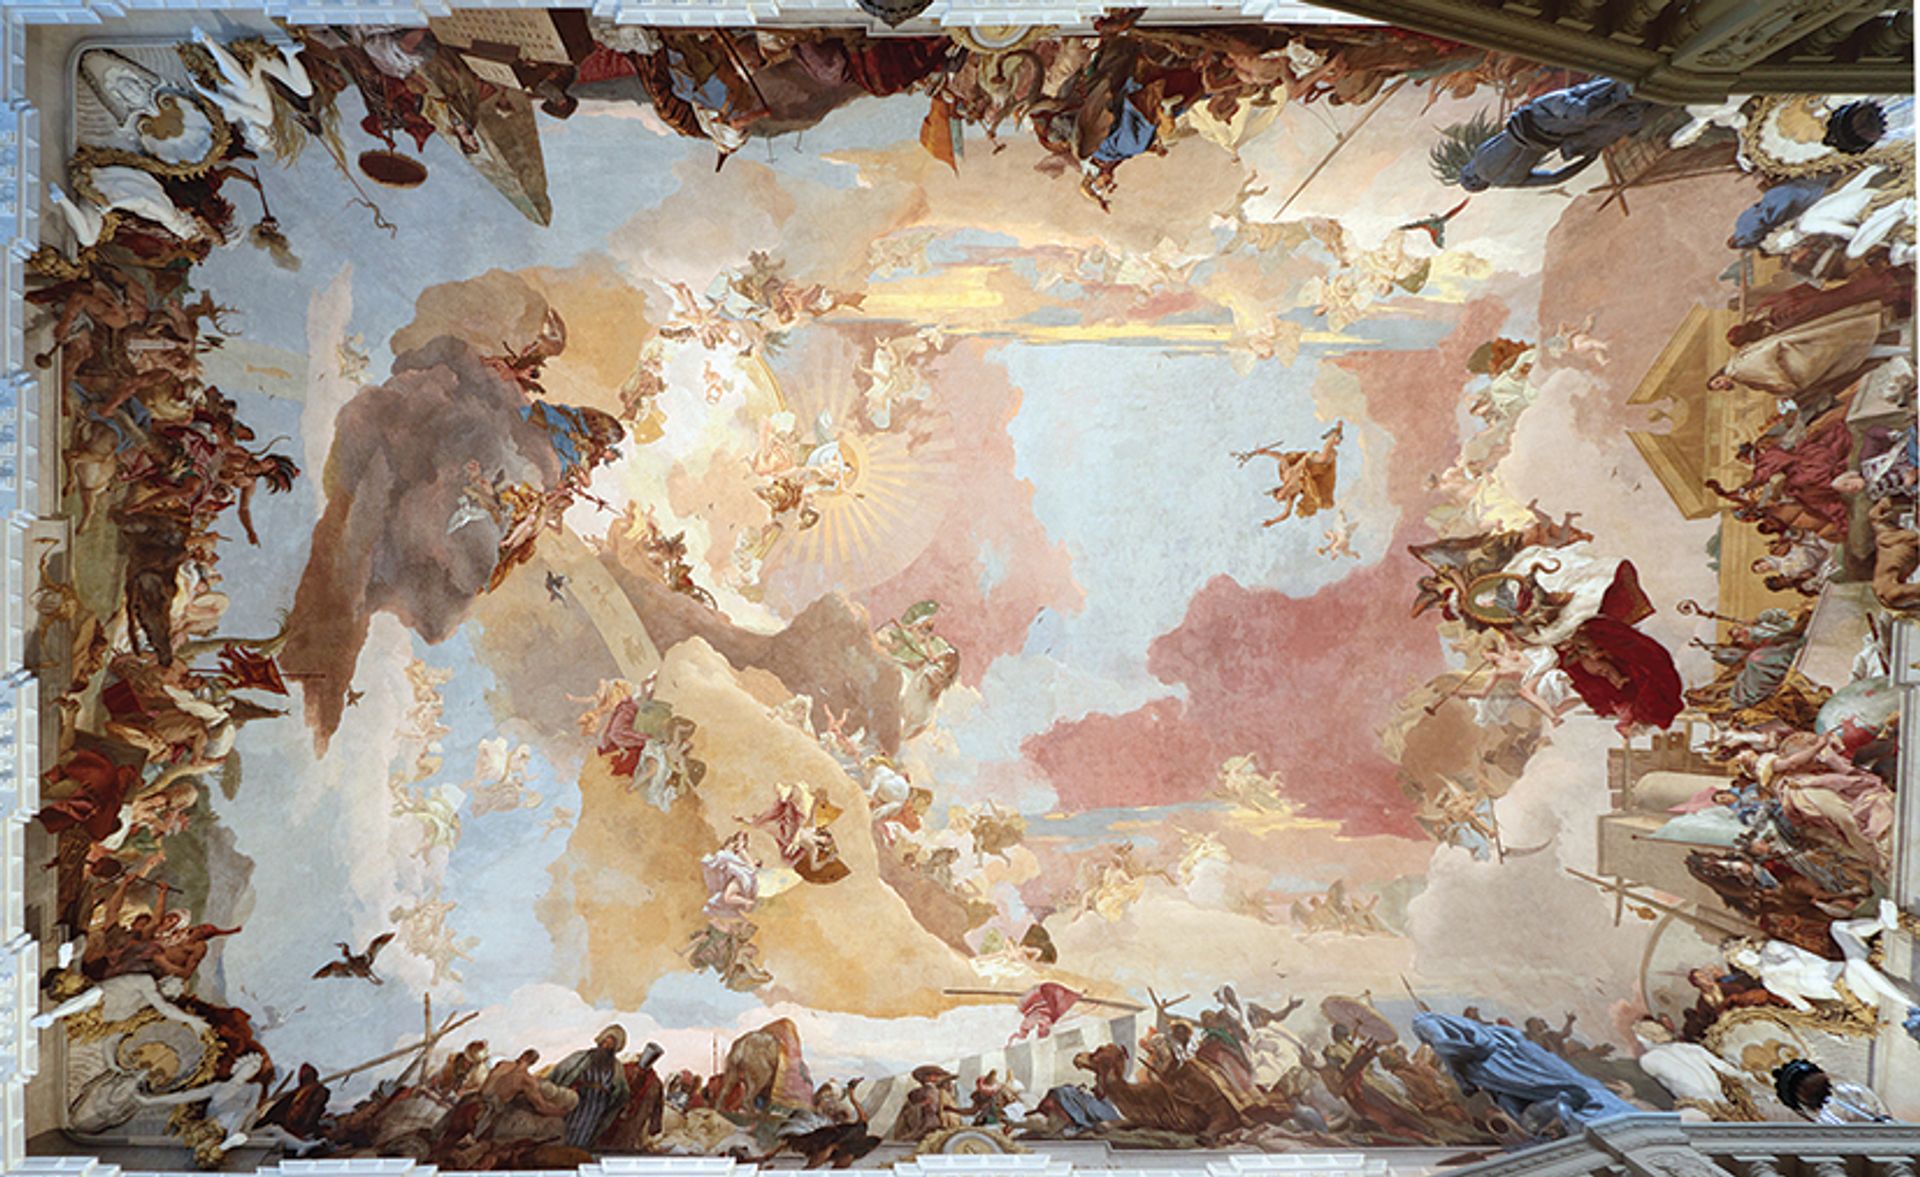 Apollo and the Continents (1752-53), Giovanni Battista Tiepolo’s ceiling fresco at the Würzburg Residence in Bavaria, Germany. In James Cahill’s debut novel, Tiepolo Blue, art historian Don is captivated by the Venetian master’s skies, which have similarly fascinated the author—in particular, the artist’s use of a distinctive shade of blue

© Tiepolo: Photo: Myriam Thyes